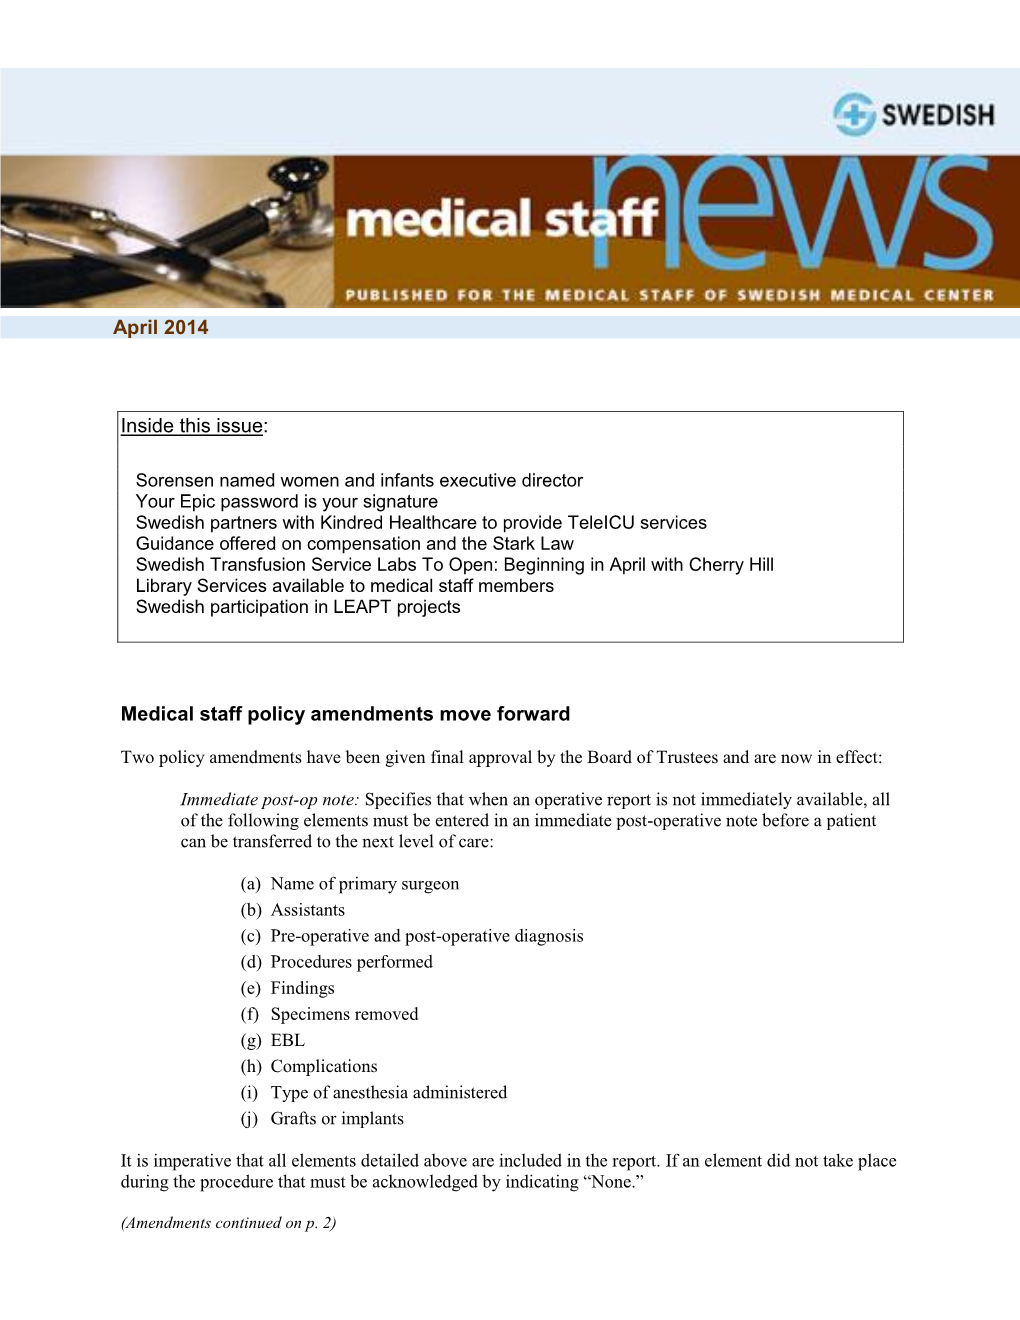 April 2014 Inside This Issue: Medical Staff Policy Amendments